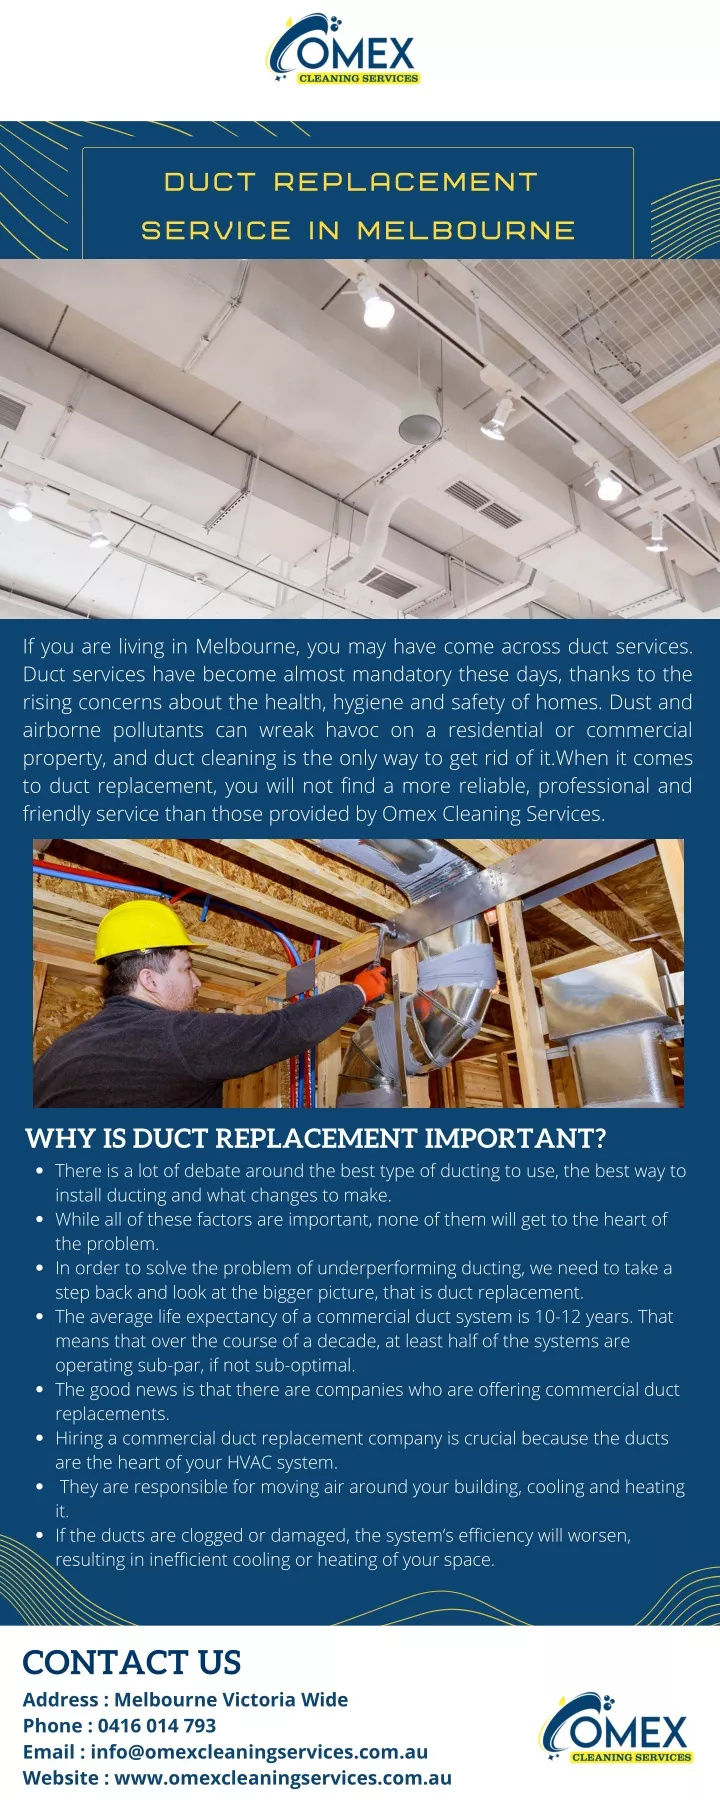 duct replacement